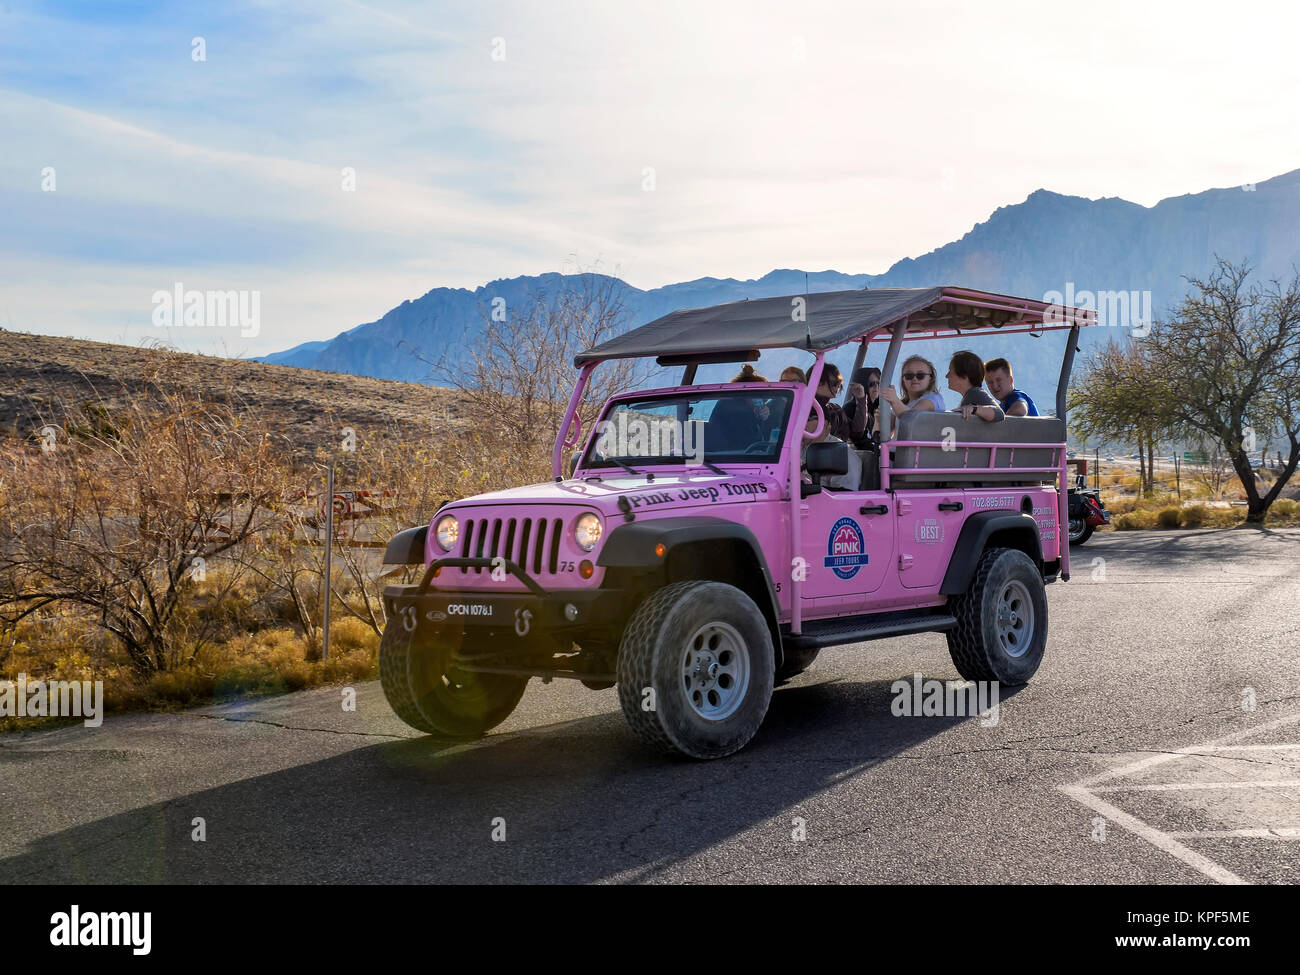 A Pink Jeep Tours Vehical at Red Rock Canyon, Las Vegas, Nevada. Stock Photo